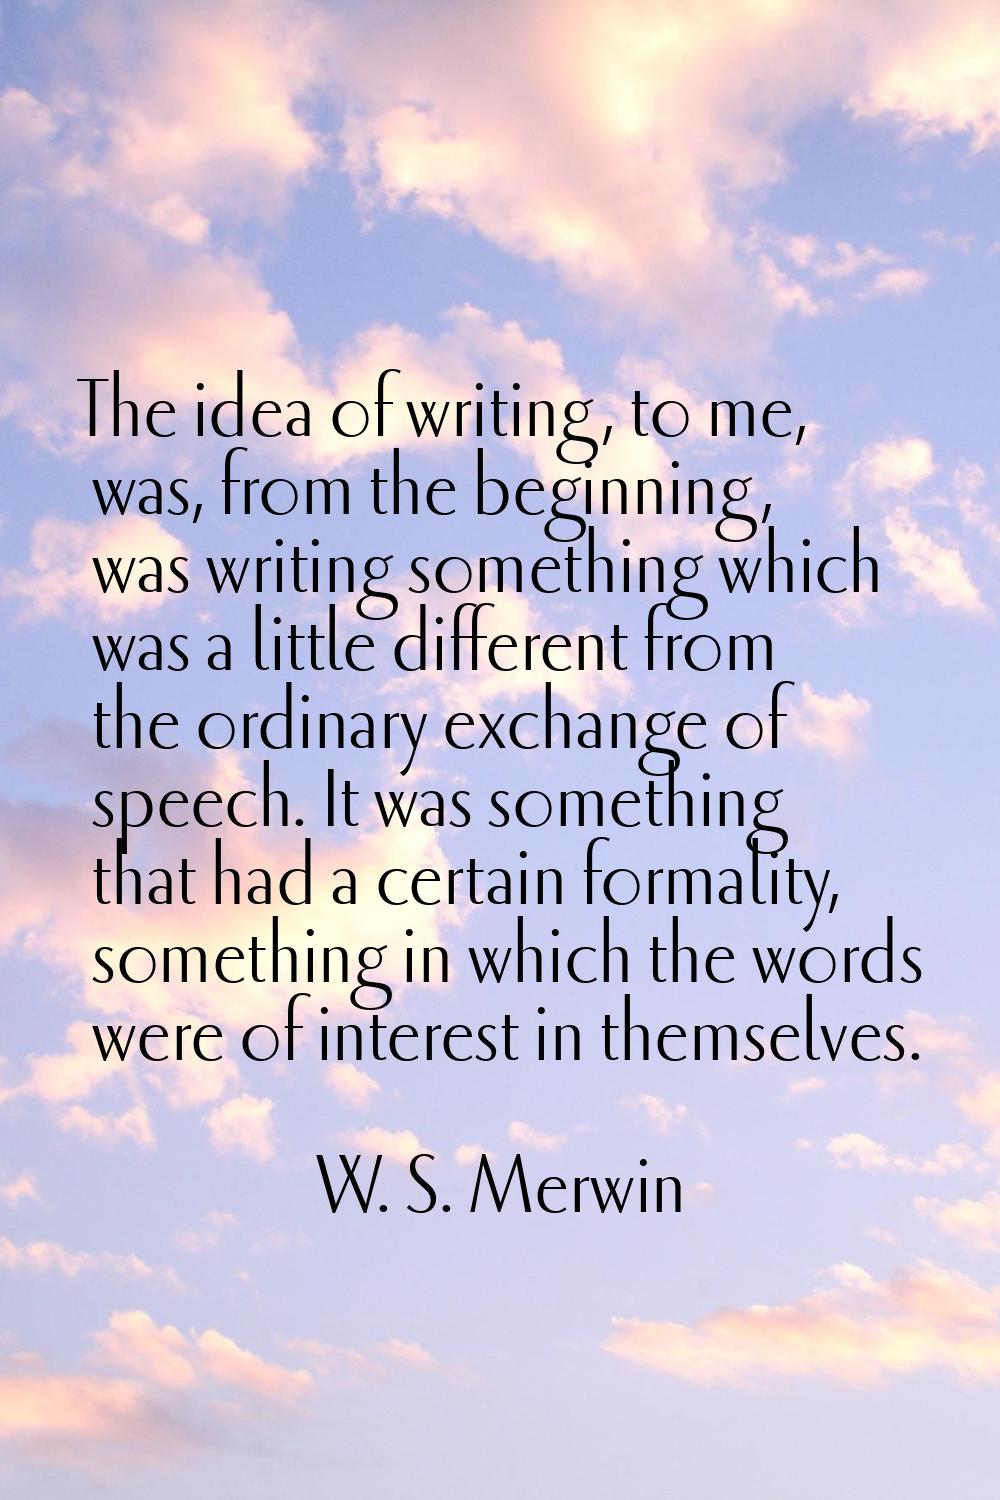 The idea of writing, to me, was, from the beginning, was writing something which was a little diffe